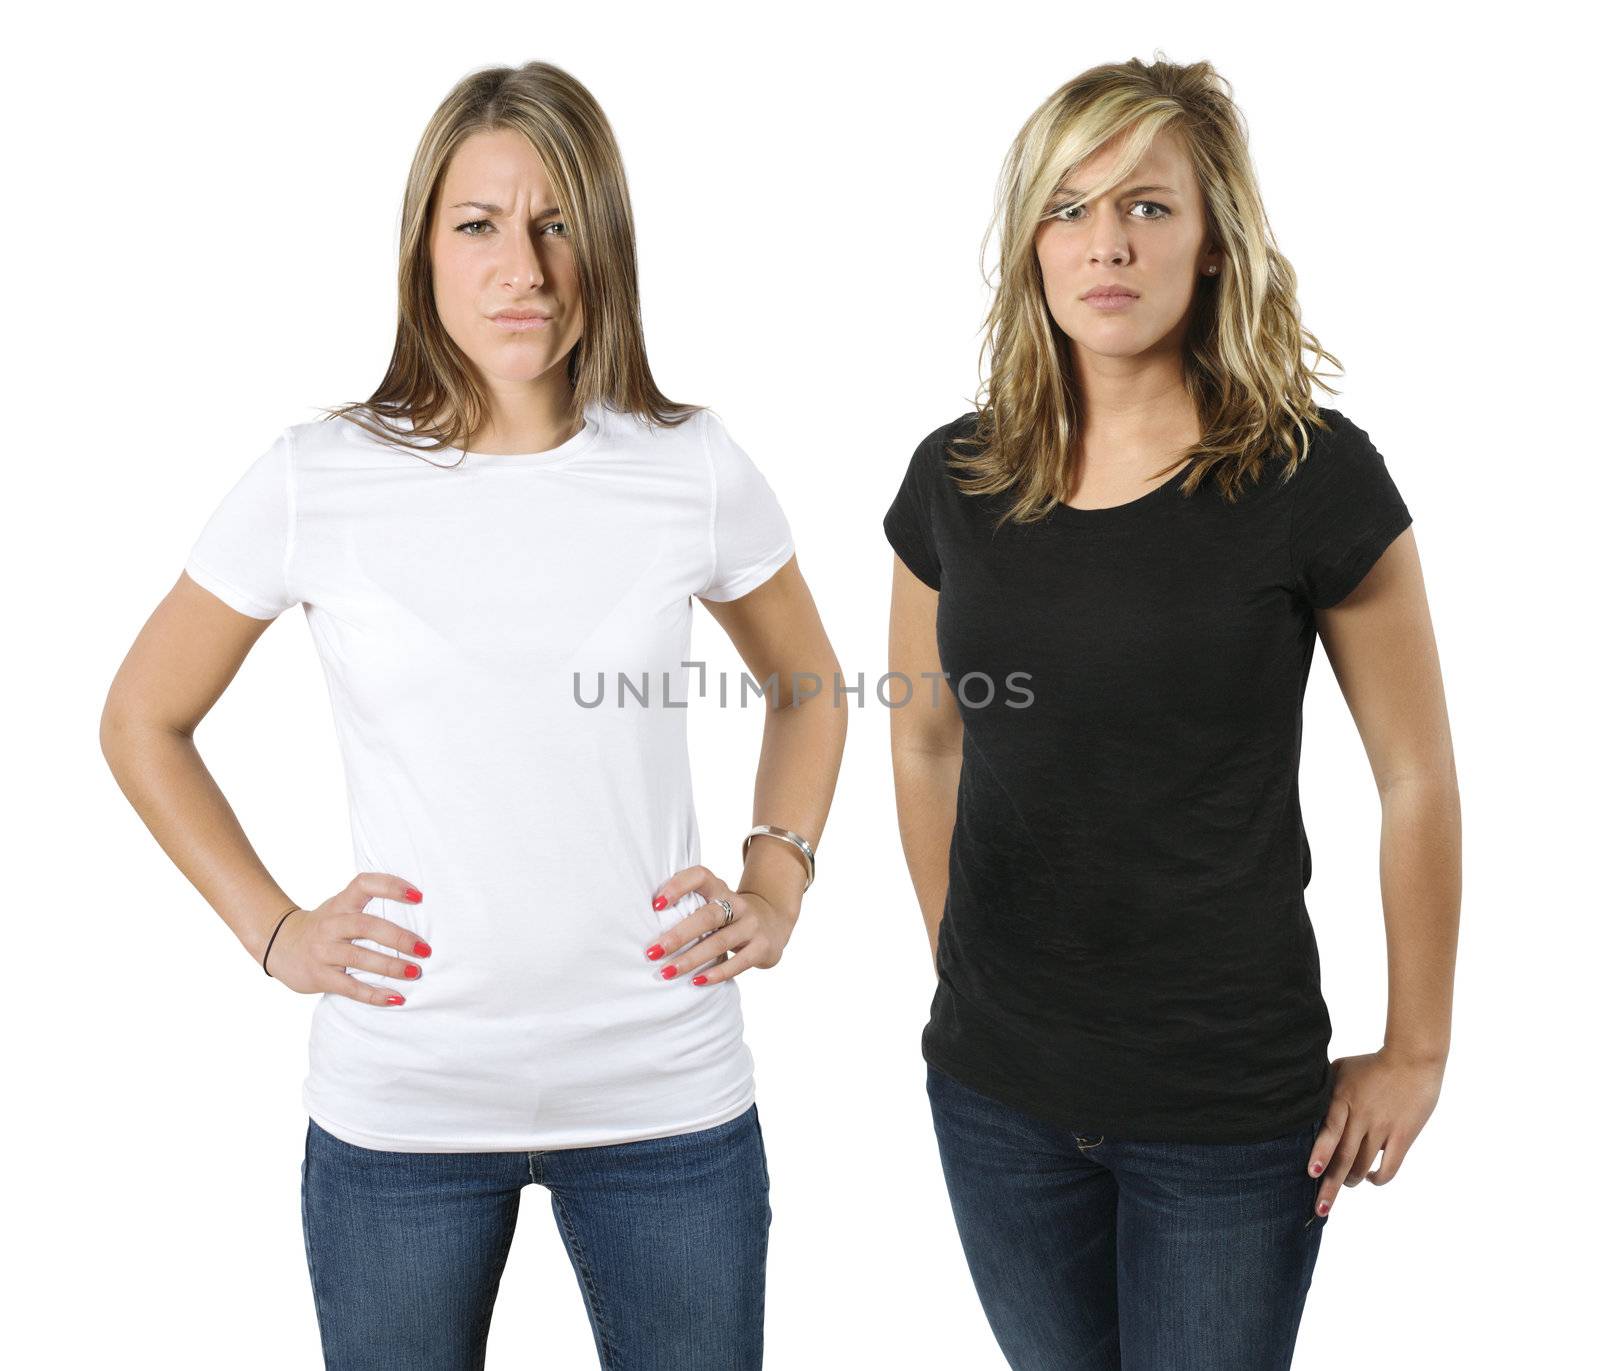 Angry young women posing with blank white and black shirts. Ready for your design or logo.